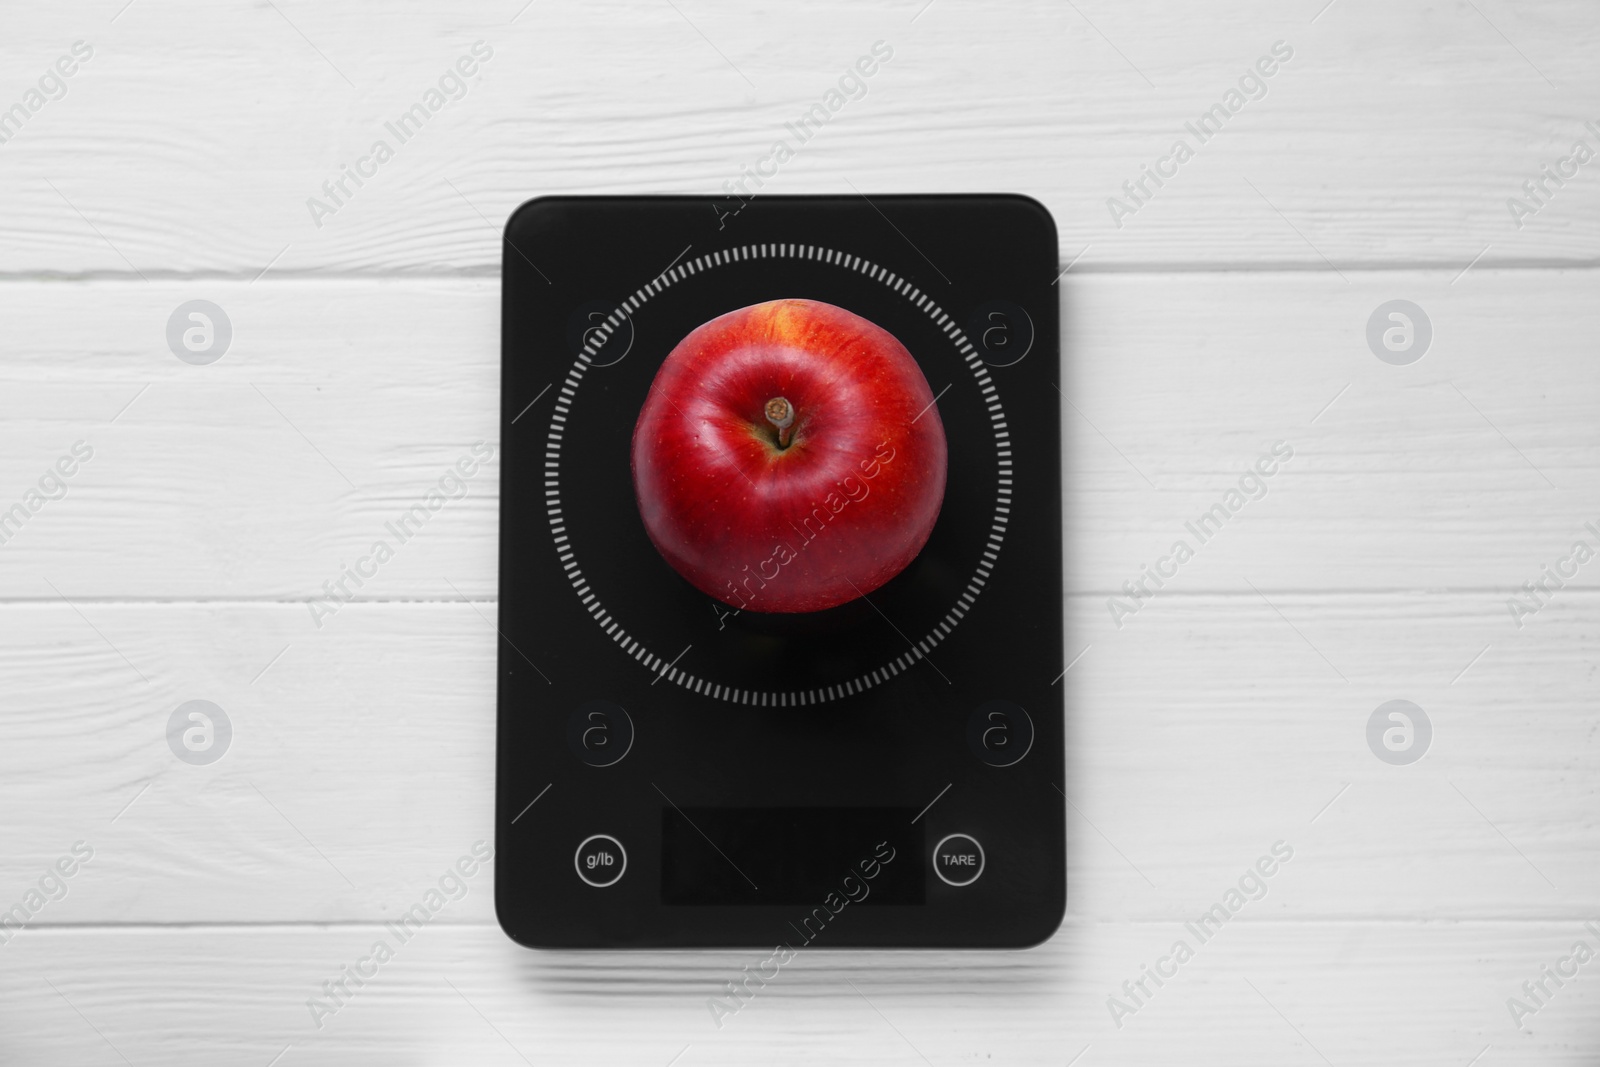 Photo of Digital kitchen scale with ripe red apple on white wooden table, top view